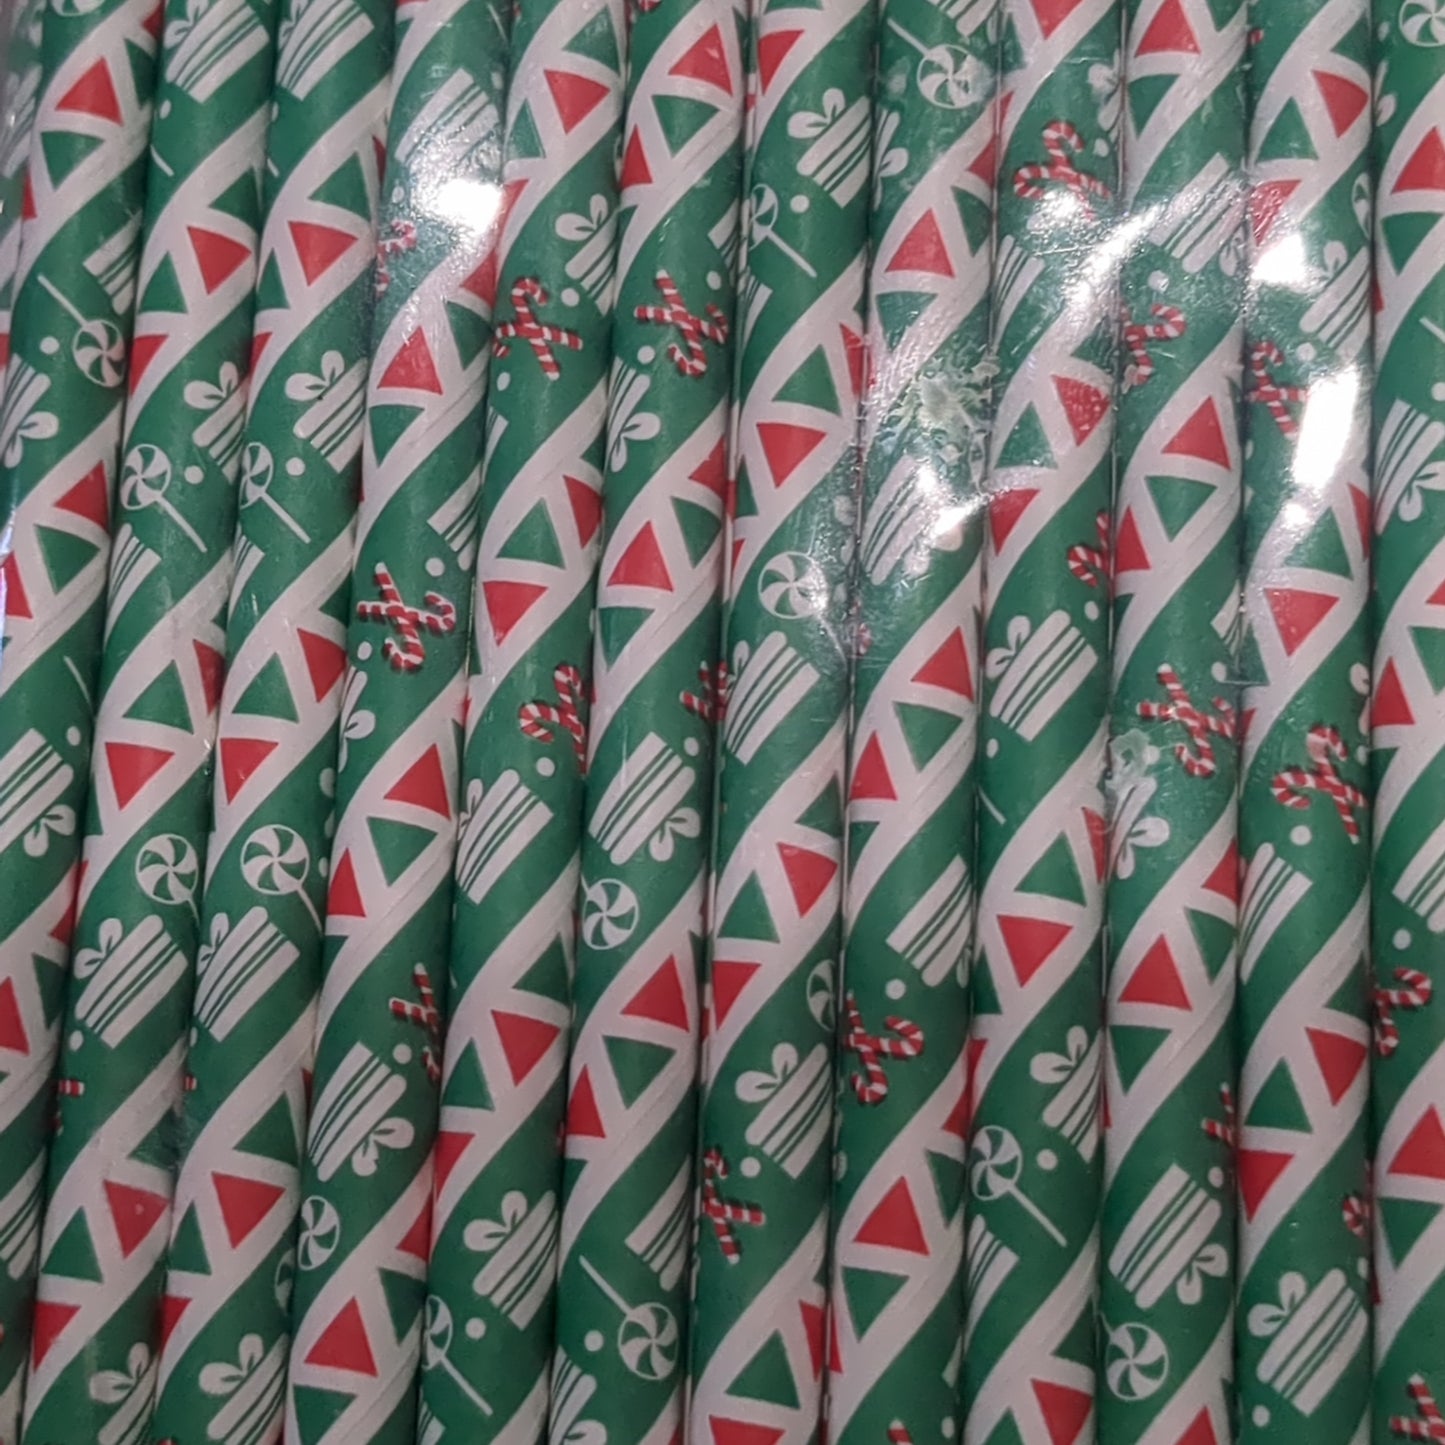 25 green, white and red paper drinking straws with gifts and candy canes